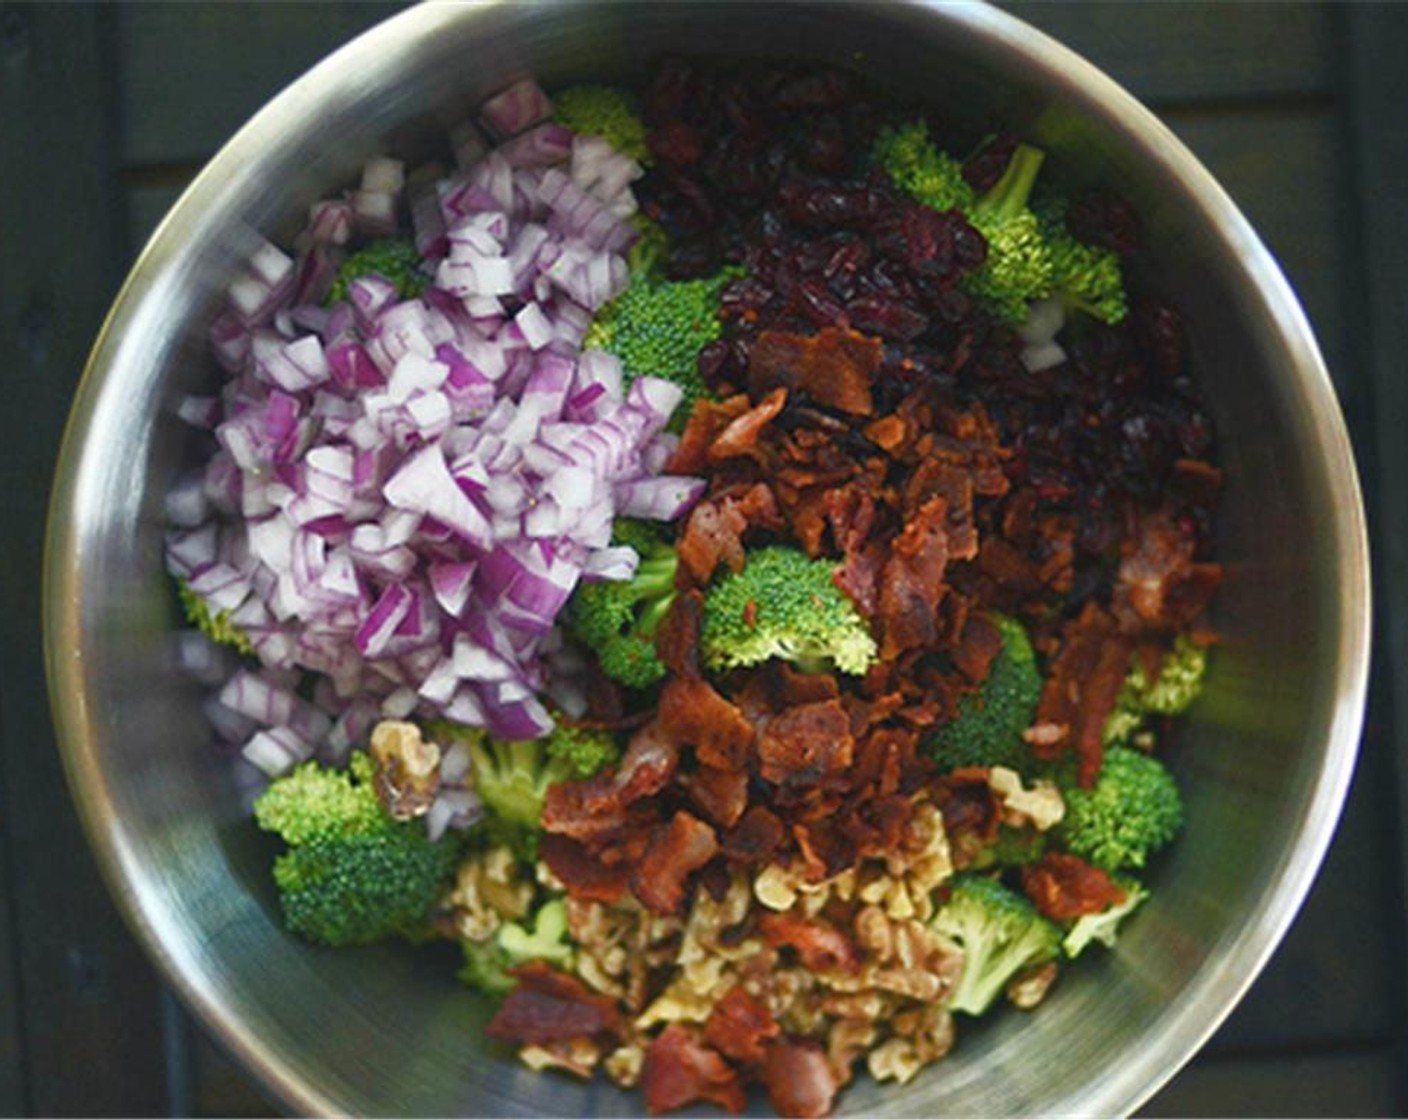 step 7 In a large bowl, combine bite-sized broccoli florets, bacon, Dried Cranberries (2/3 cup), roasted walnuts, and diced red onion. Toss to combine. Season with Salt (to taste) and Ground Black Pepper (to taste).